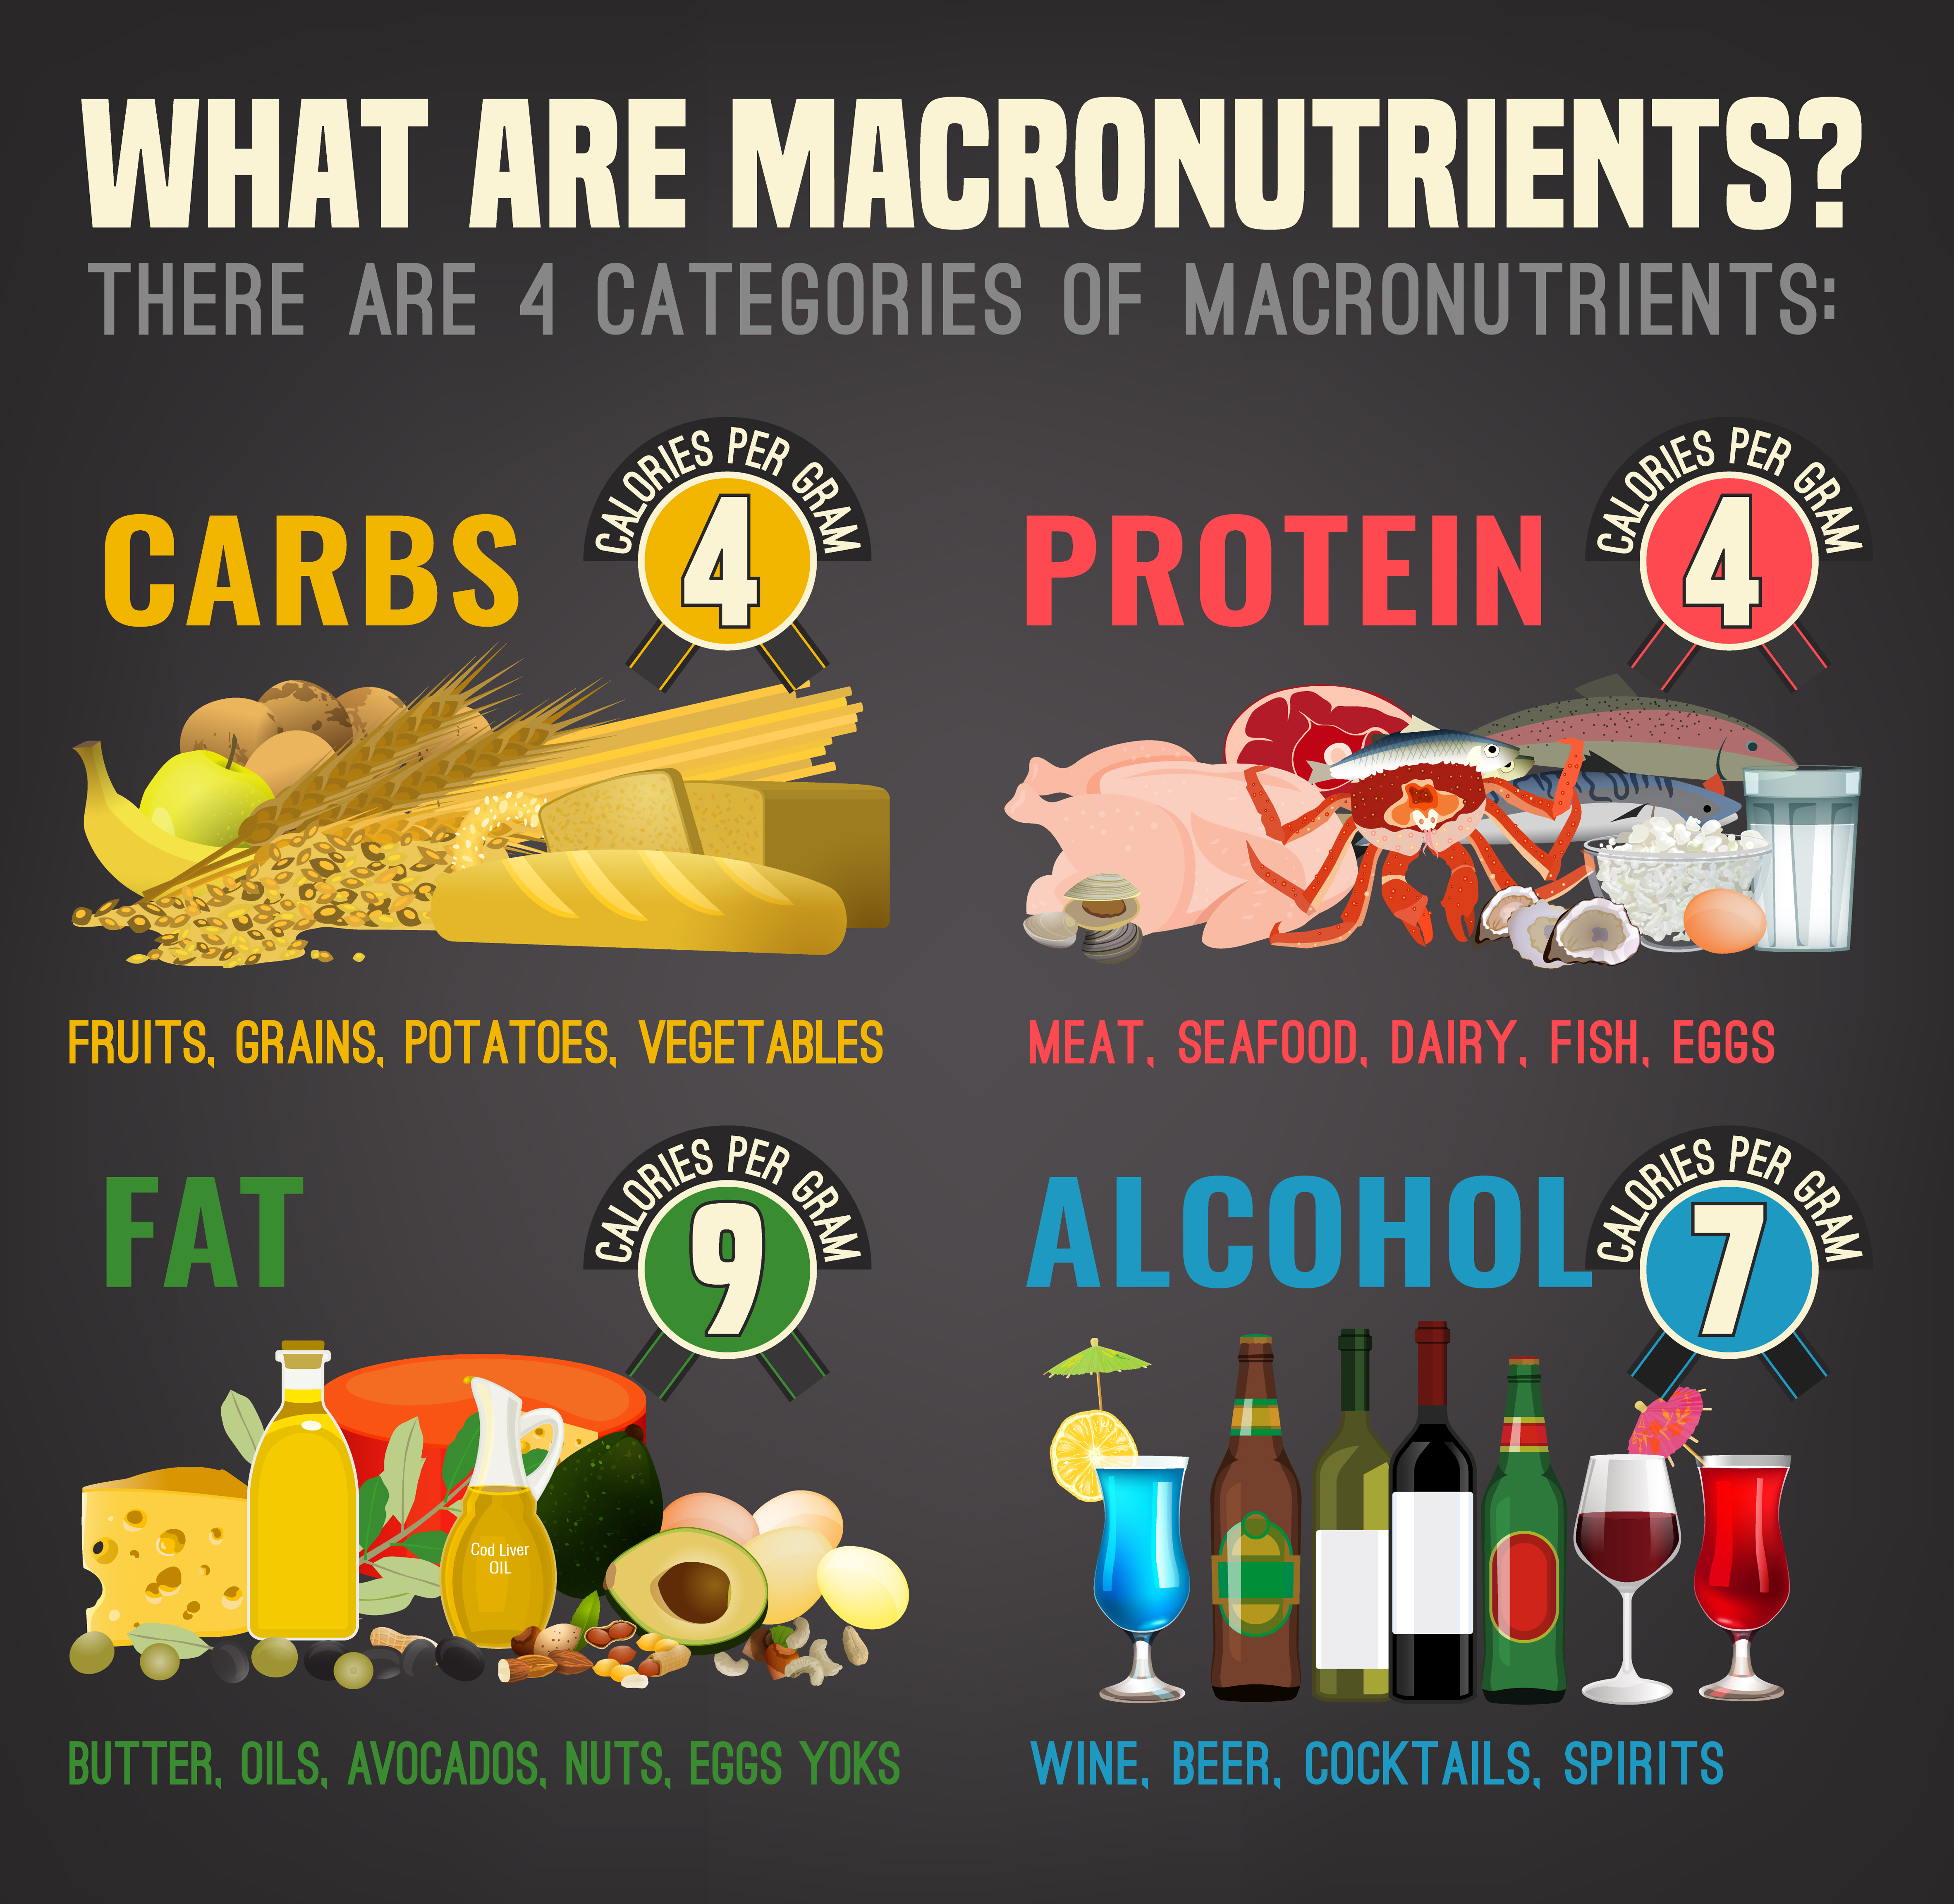 4 basic groups of macronutrients - Carbohydrates, protein, fats and alcohol